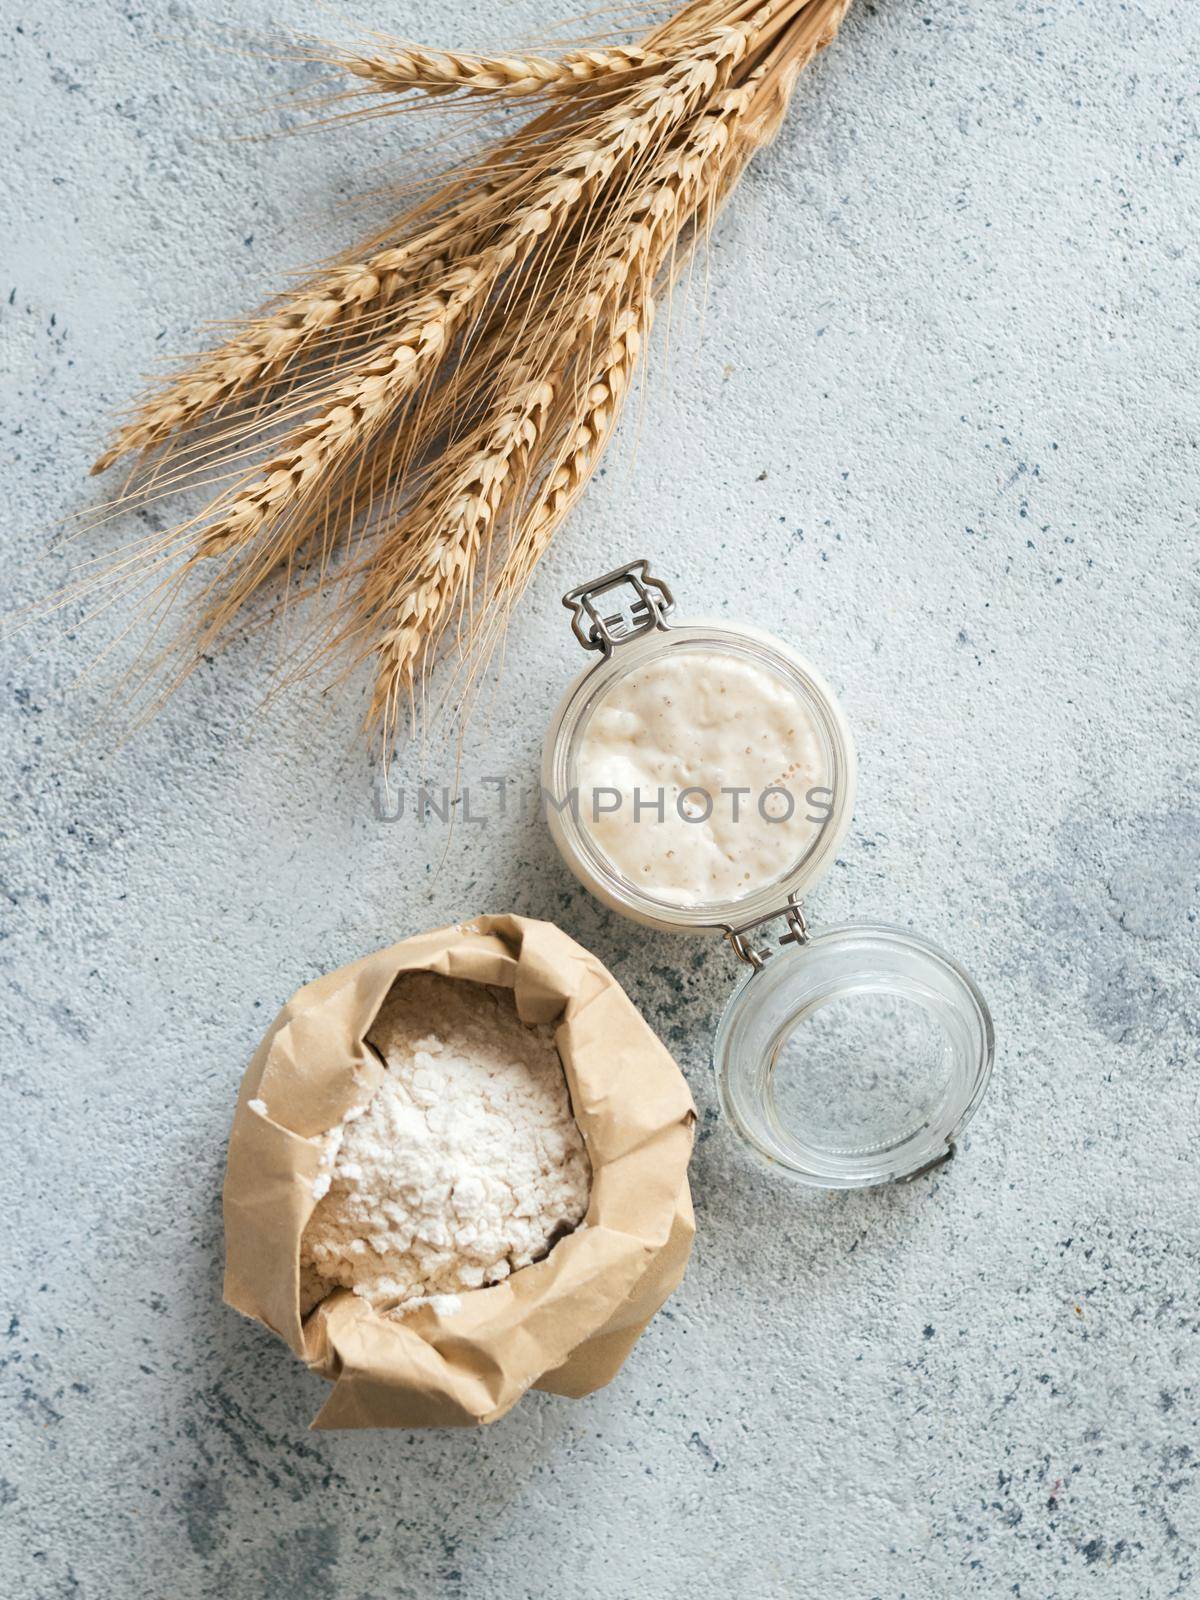 Wheat sourdough starter. Top view of bread making ingredients - glass jar with sourdough starter, flour in paper bag and ears over gray cement background. Copy space for text or design. Vertical.